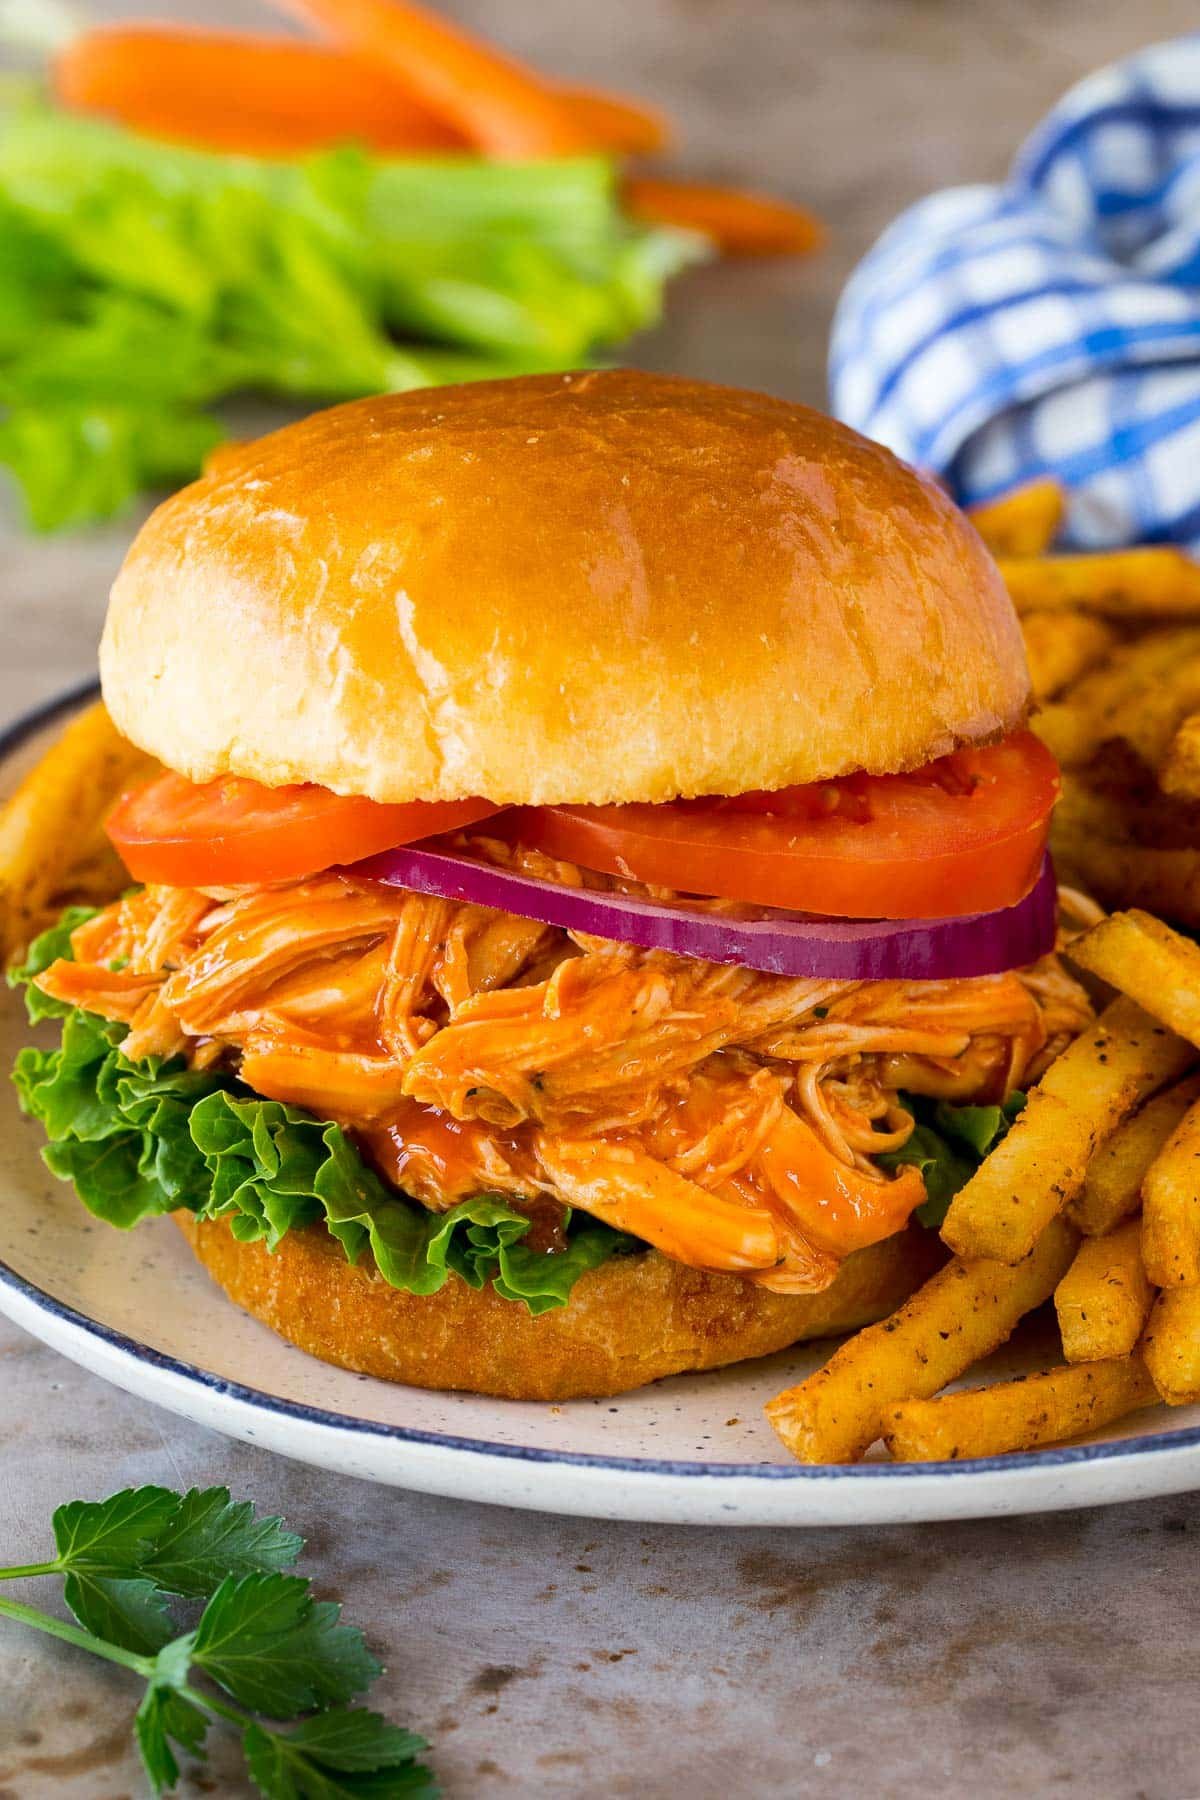 A sandwich made with crock pot buffalo chicken, served with french fries.